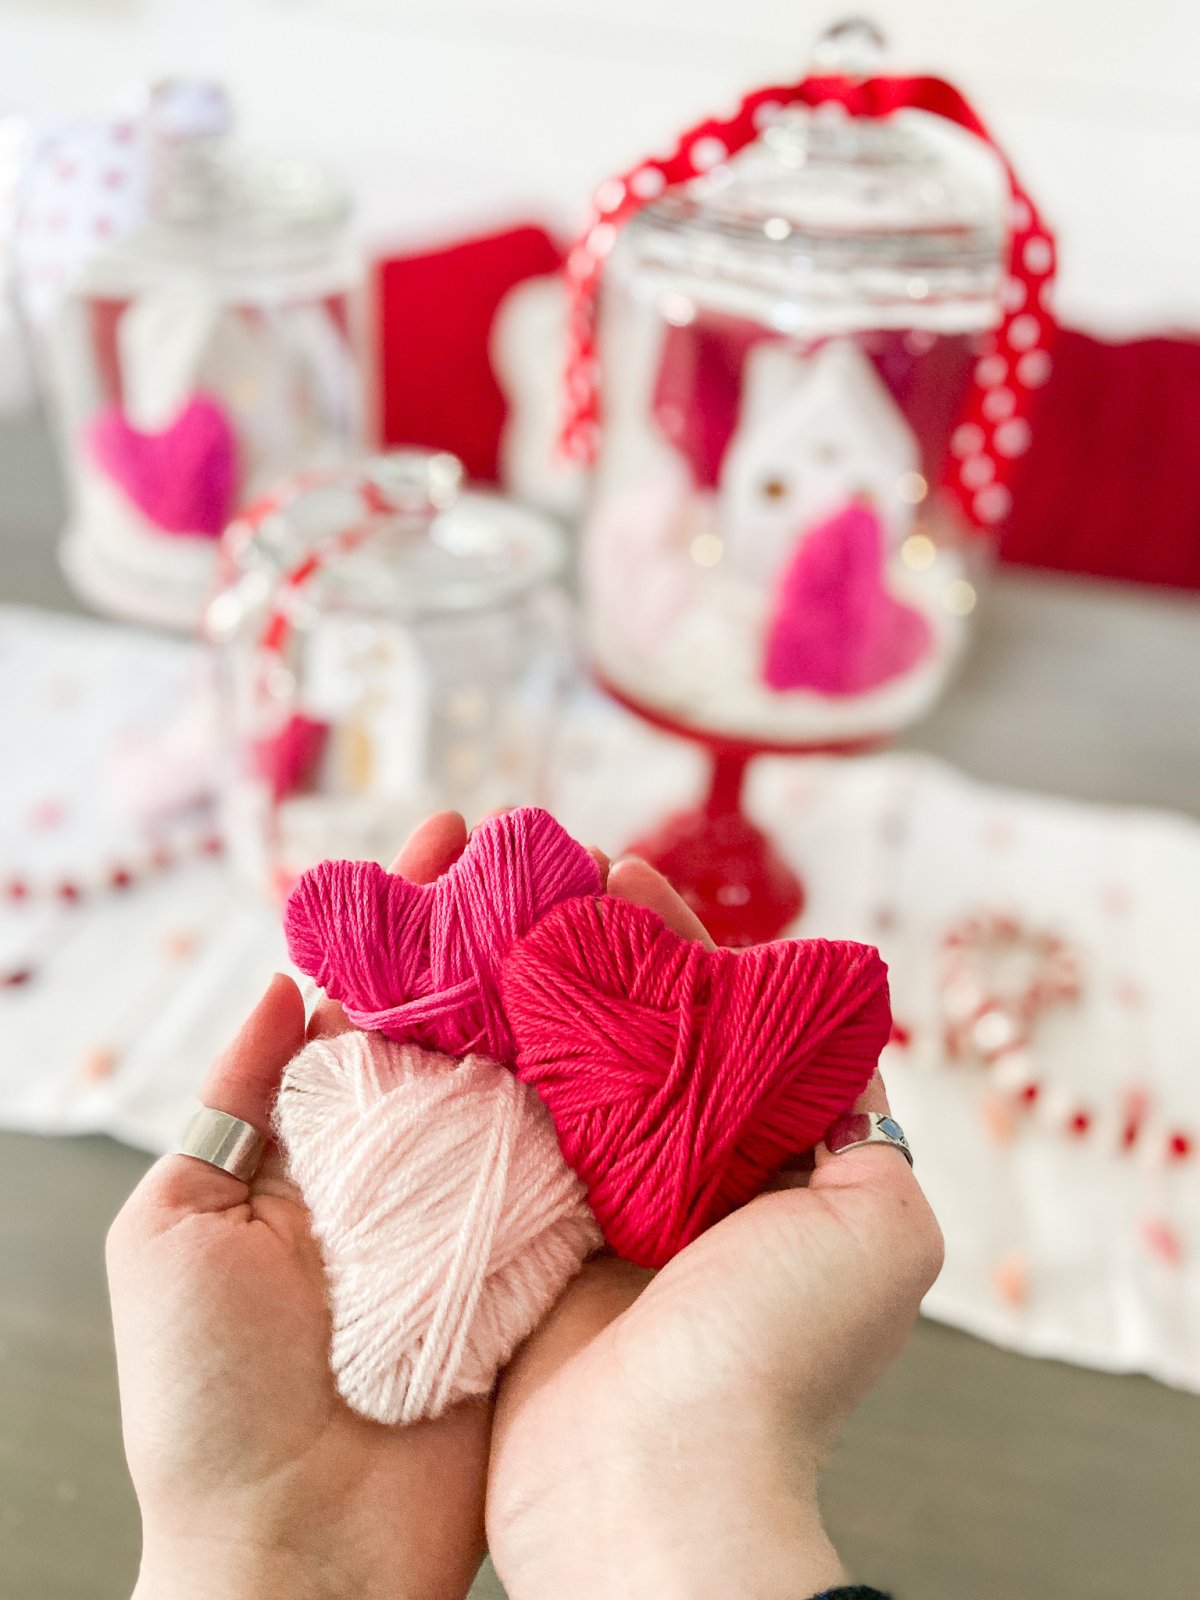 Valentine’s Day Yarn-Wrap Cardboard Hearts + Centerpiece. Yarn-wrapped cardboard hearts are so simple to make and can be used for all kinds of Valentine’s Day crafts. Add them to clear jars for a pretty centerpiece idea!